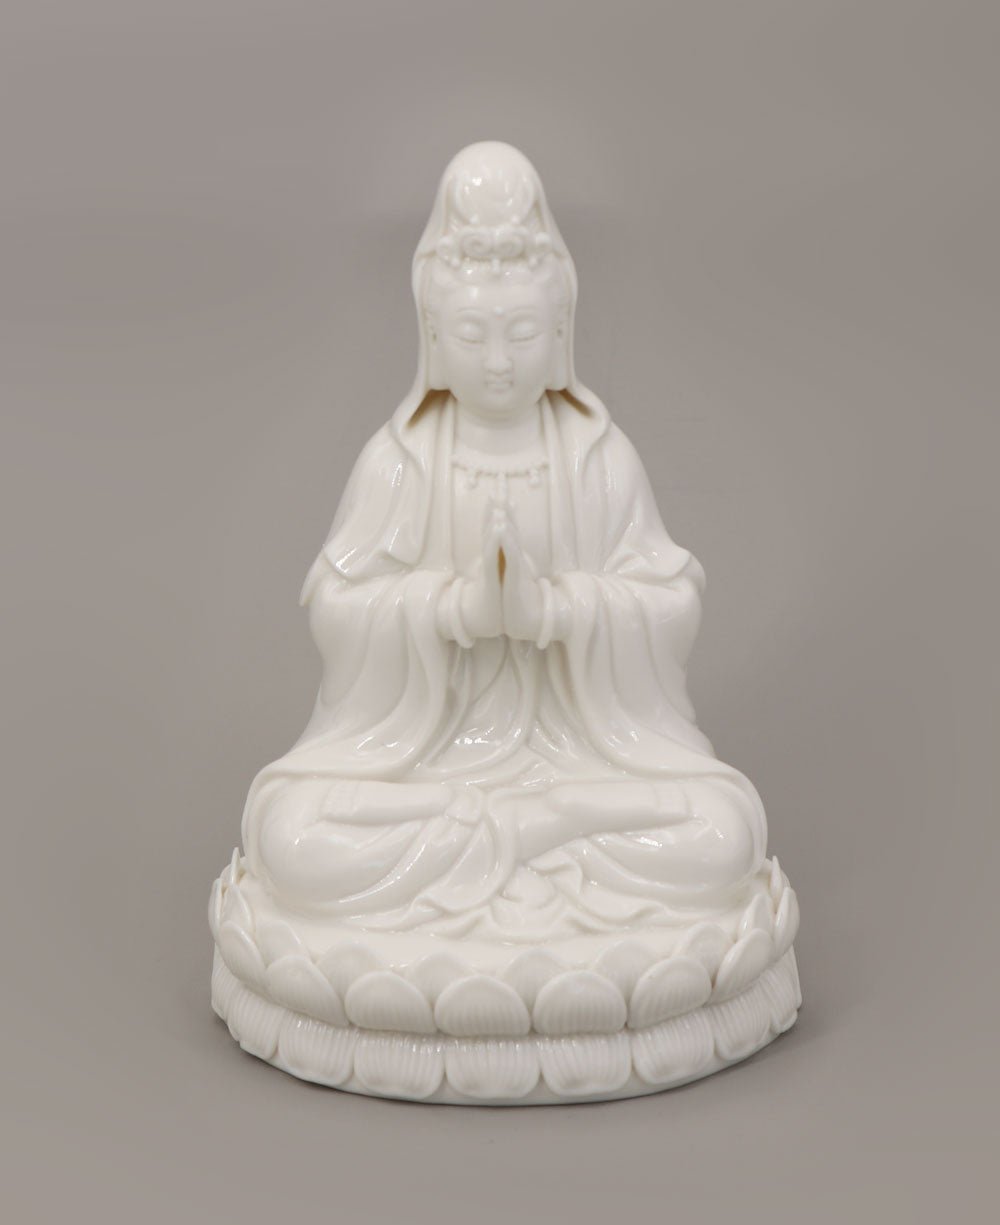 White Porcelain Praying Kuan Yin Statue, 6.5 Inches - Sculptures & Statues